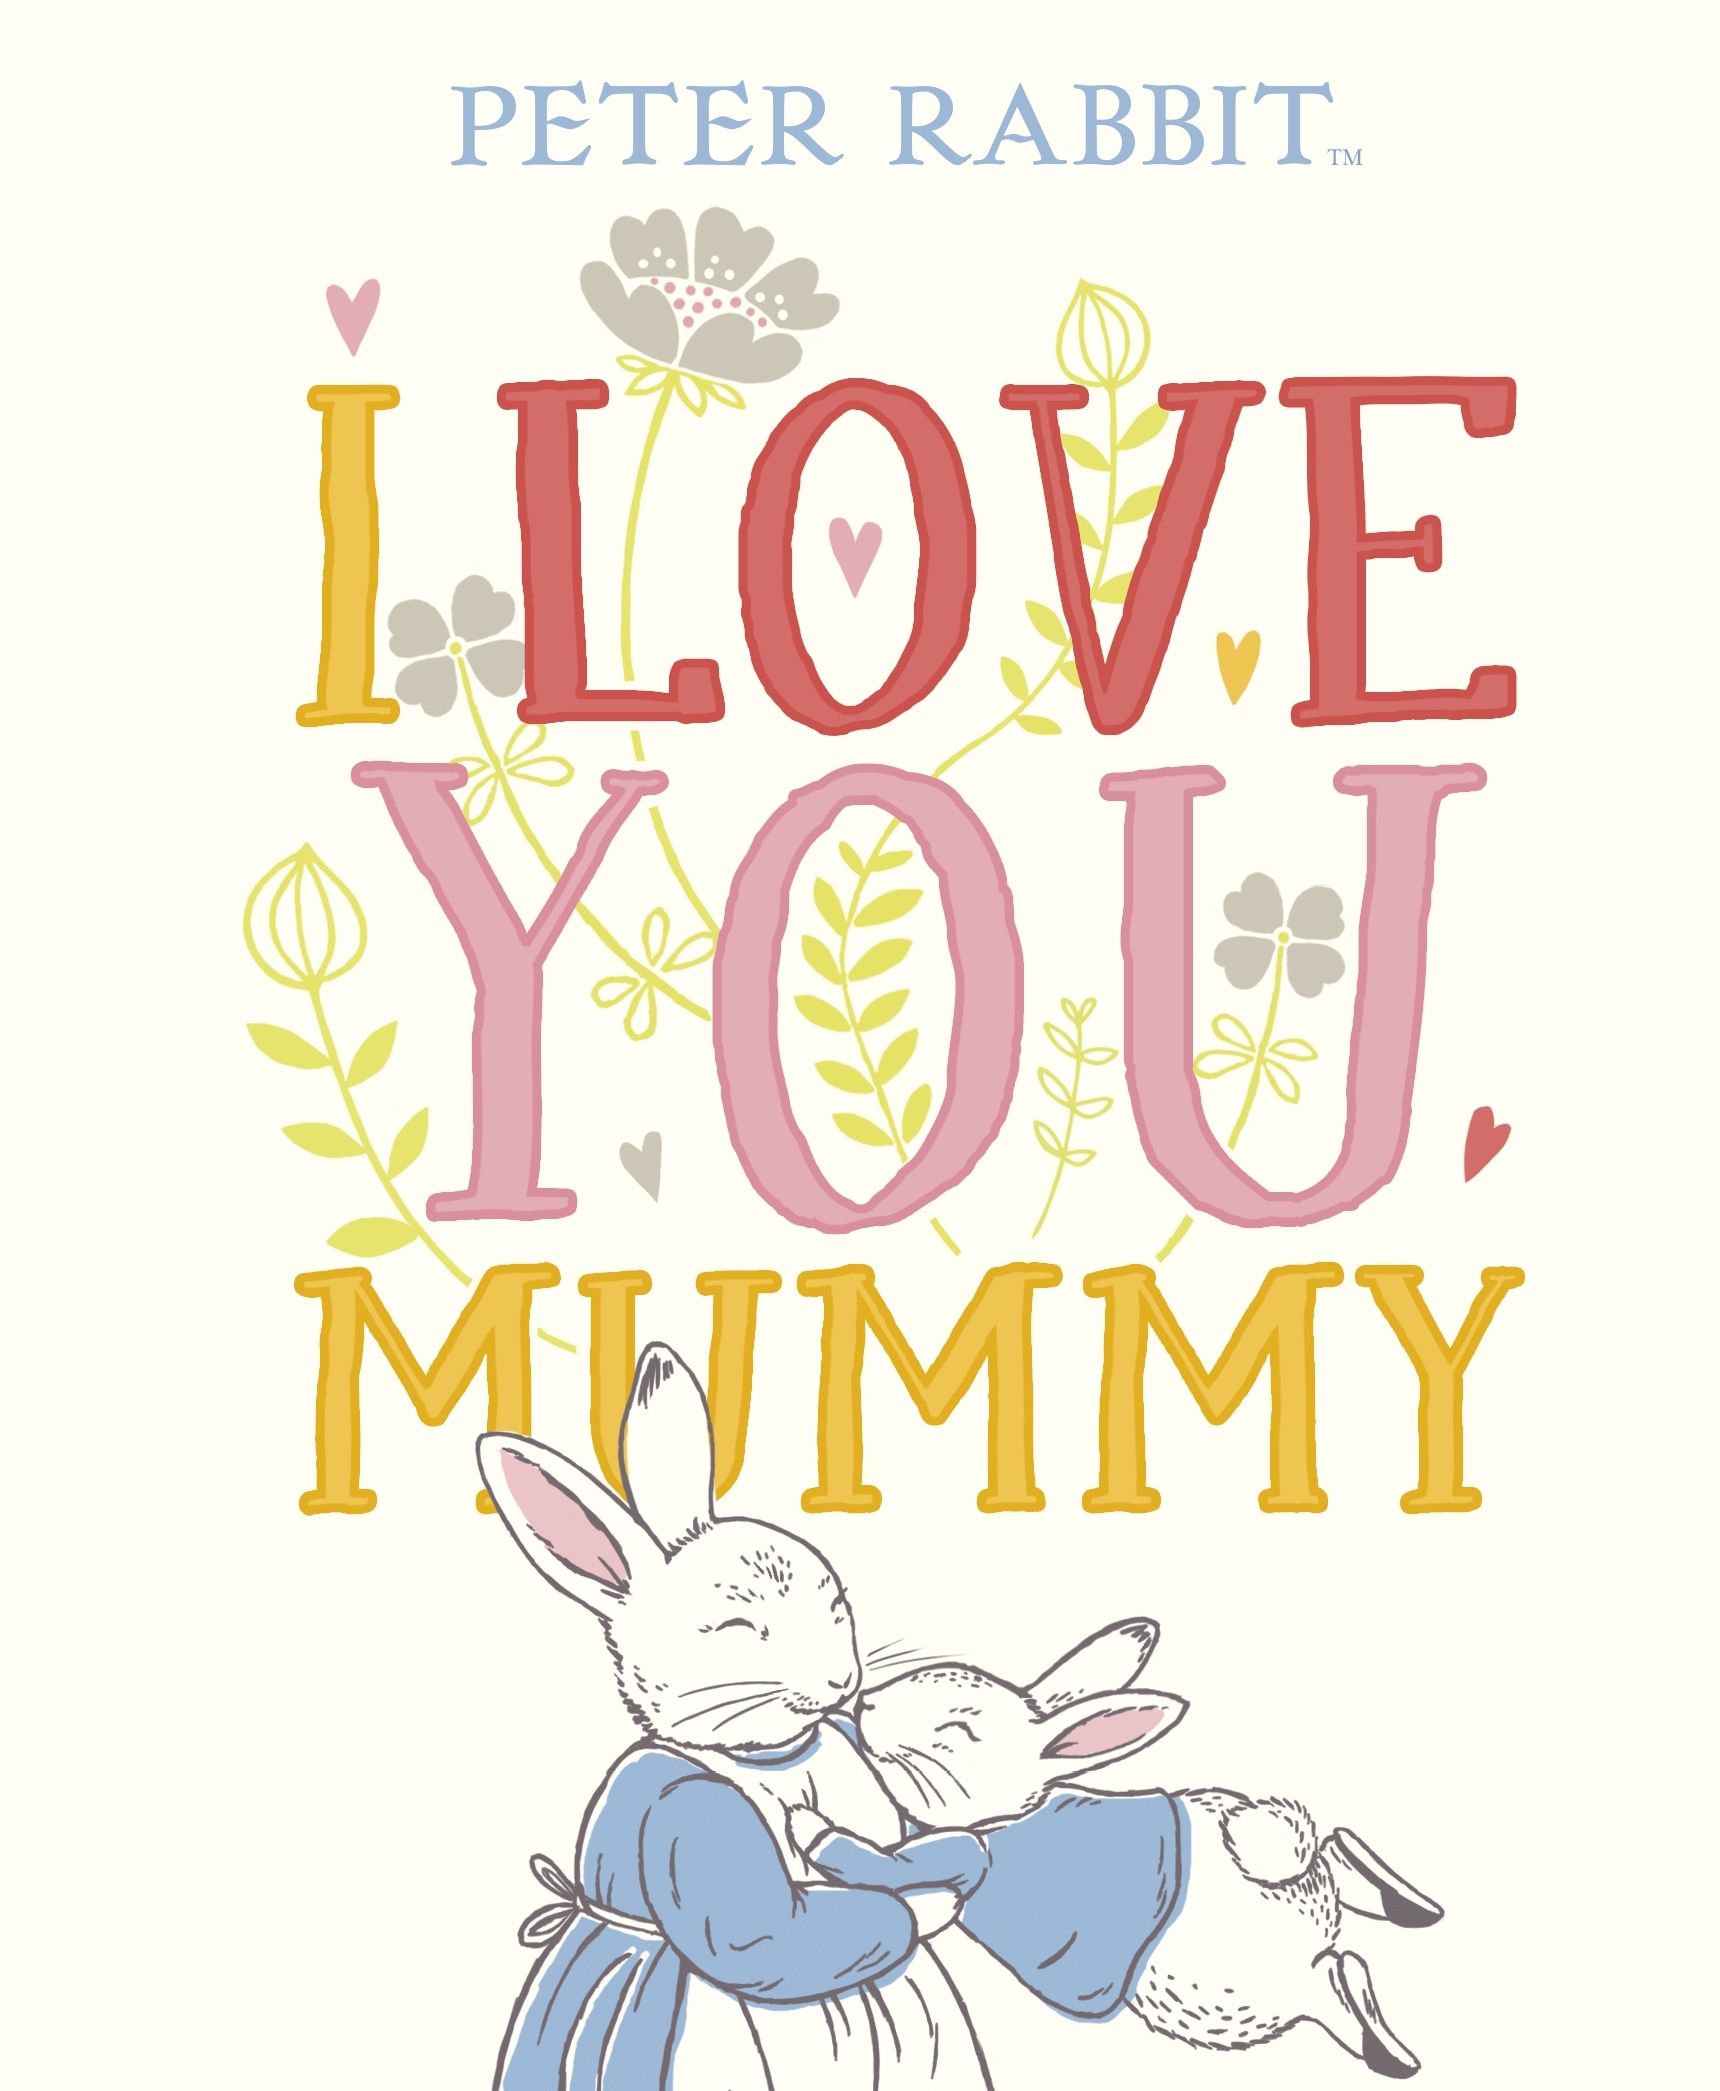 Book “Peter Rabbit I Love You Mummy” by Beatrix Potter — March 7, 2019